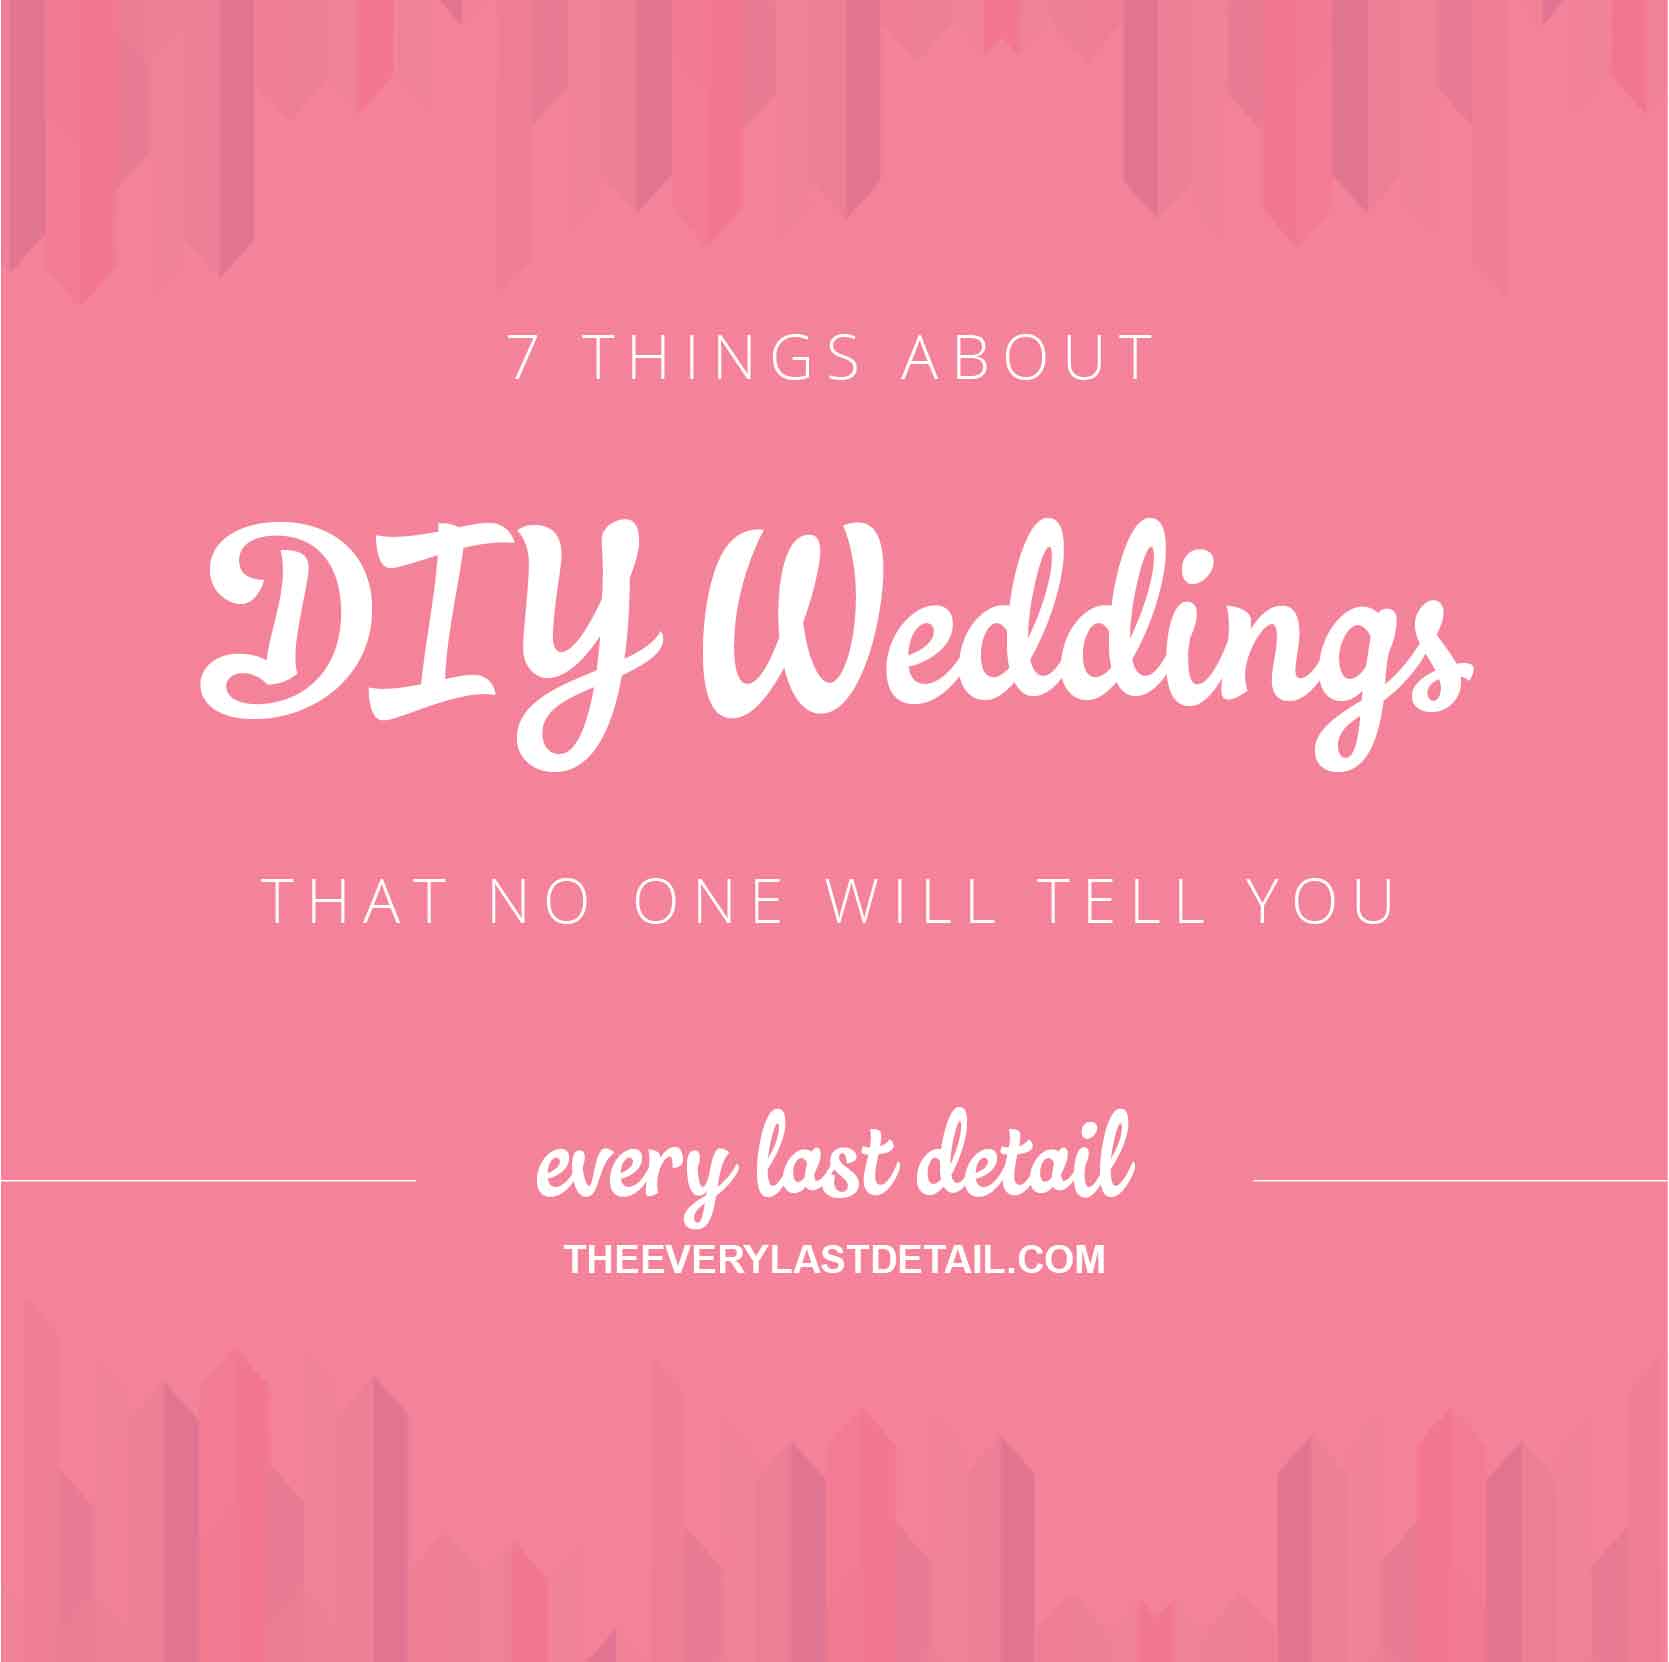 7 things about DIY Weddings that no one will tell you via TheELD.com